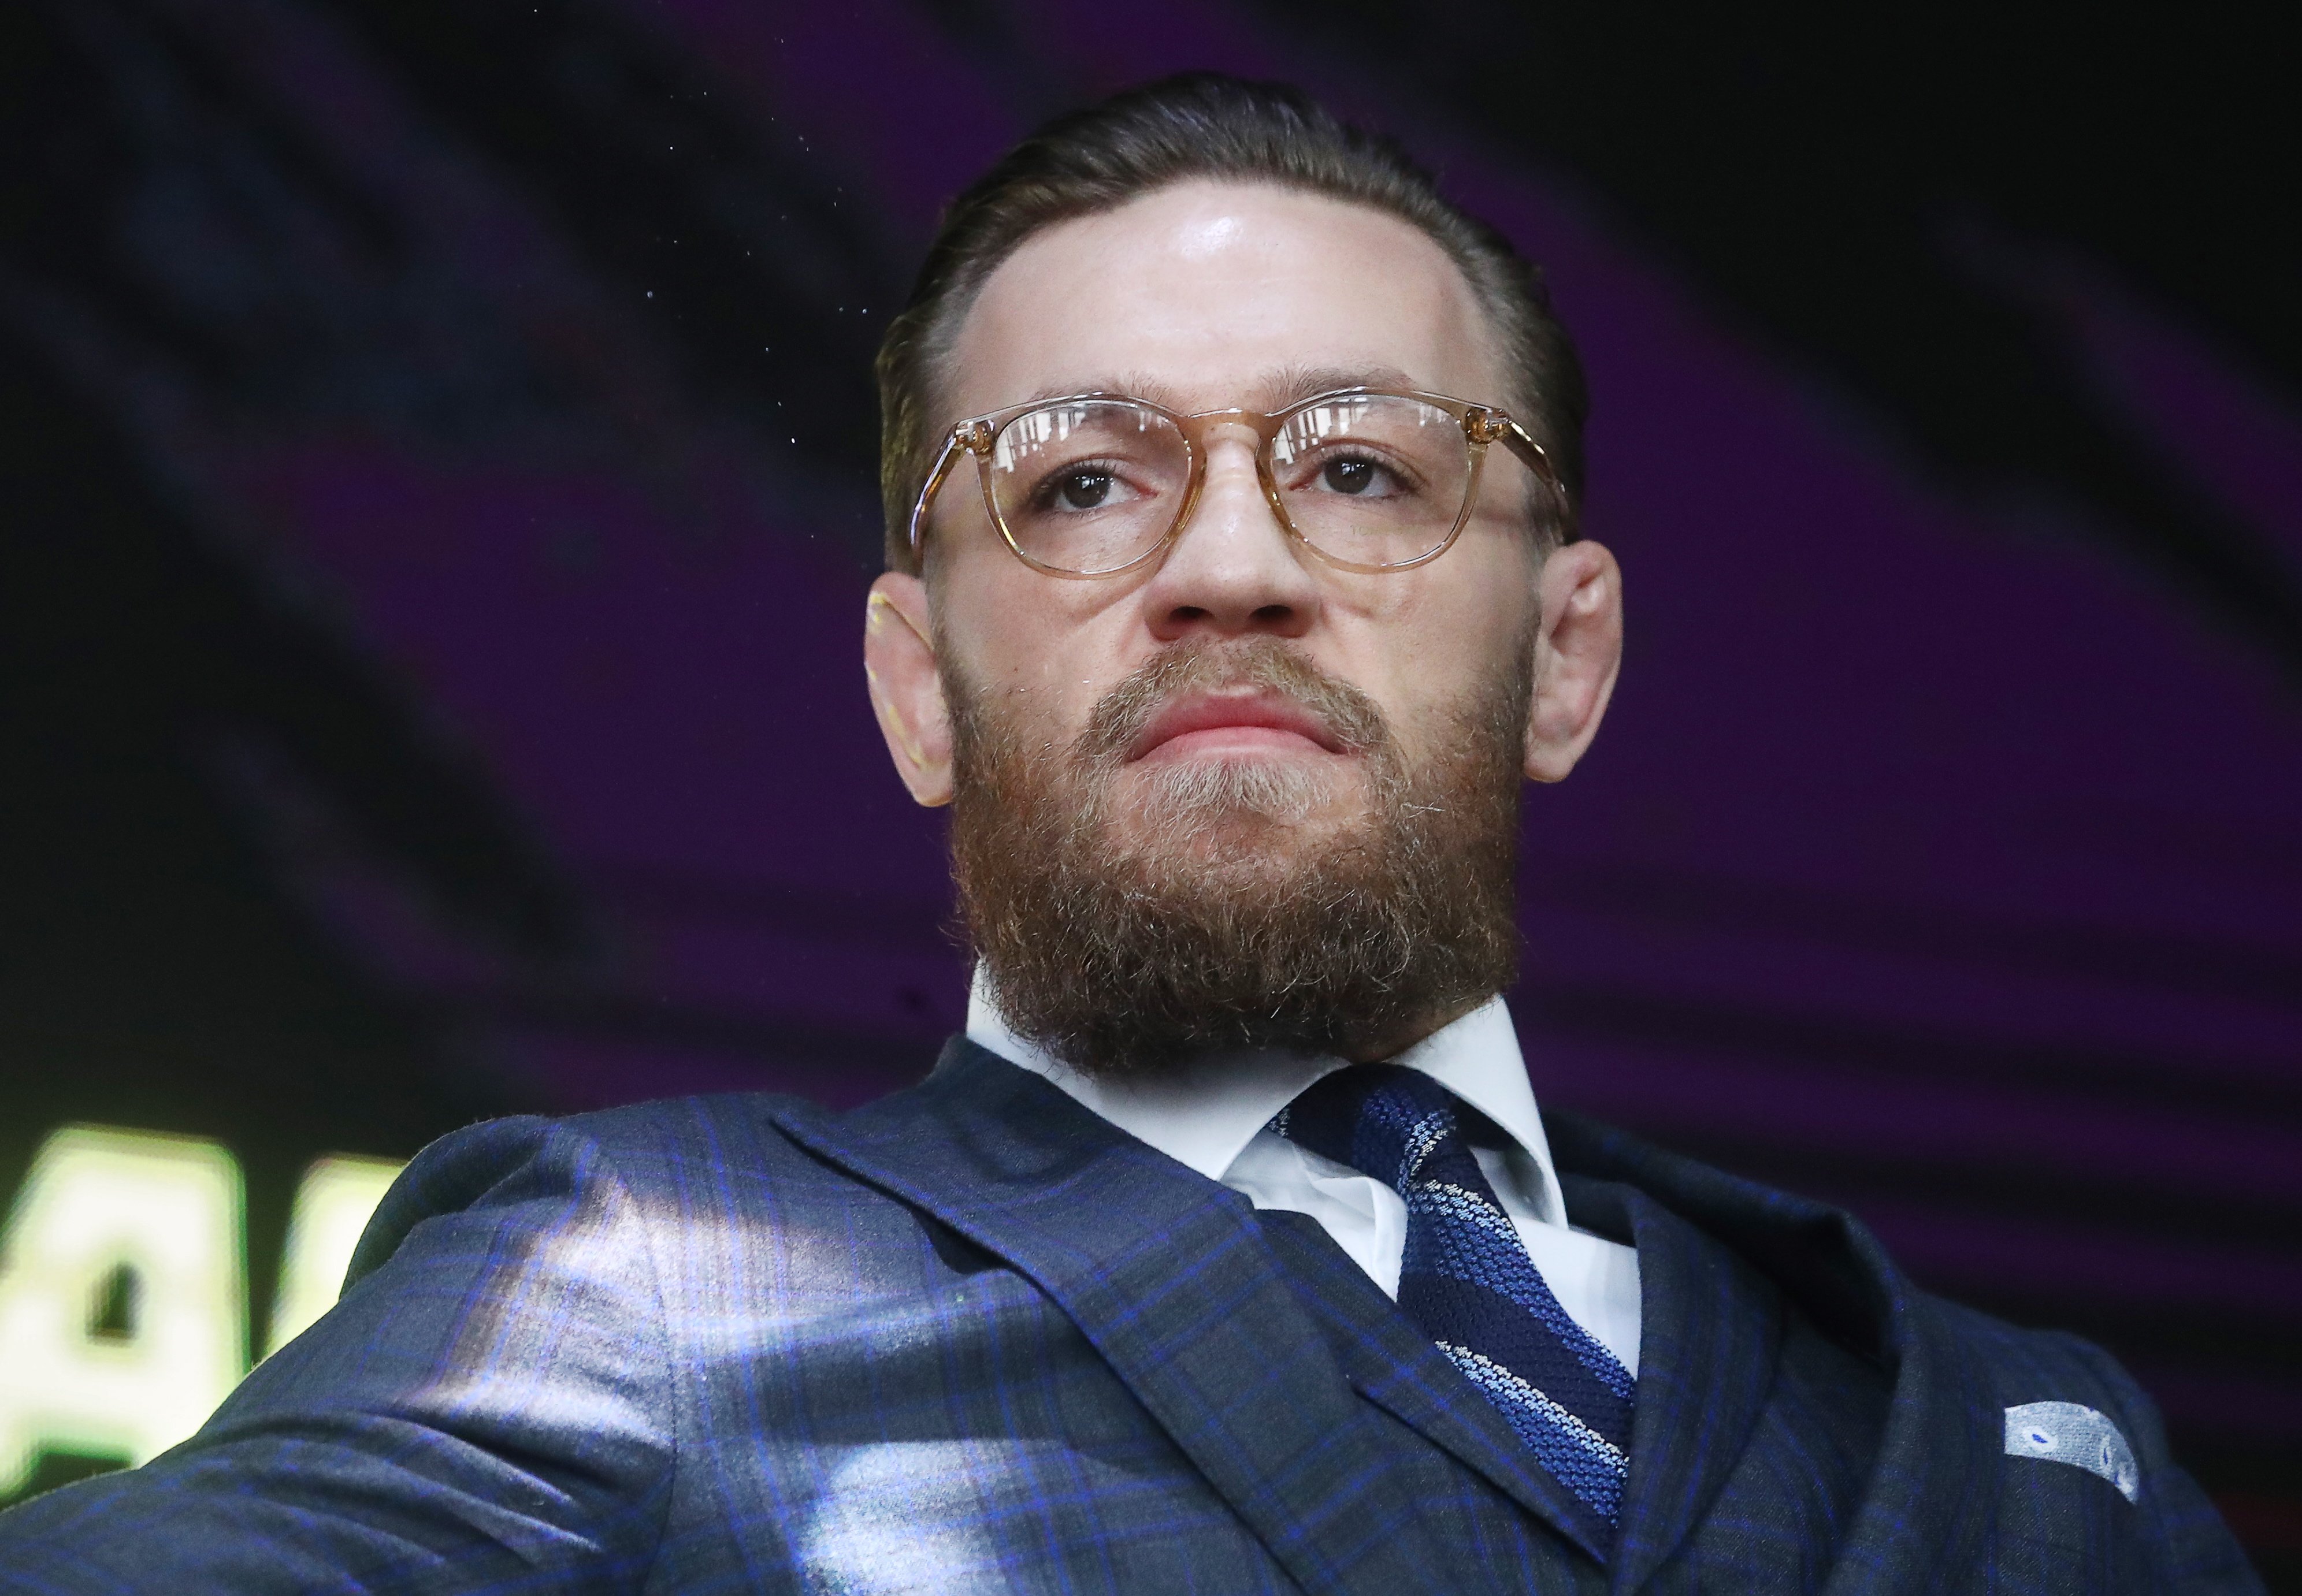 Conor McGregor, gives a press conference in Moscow, Rusian, on October 24, 2019. | Photo by Stanislav Krasilnikov\TASS via Getty Images